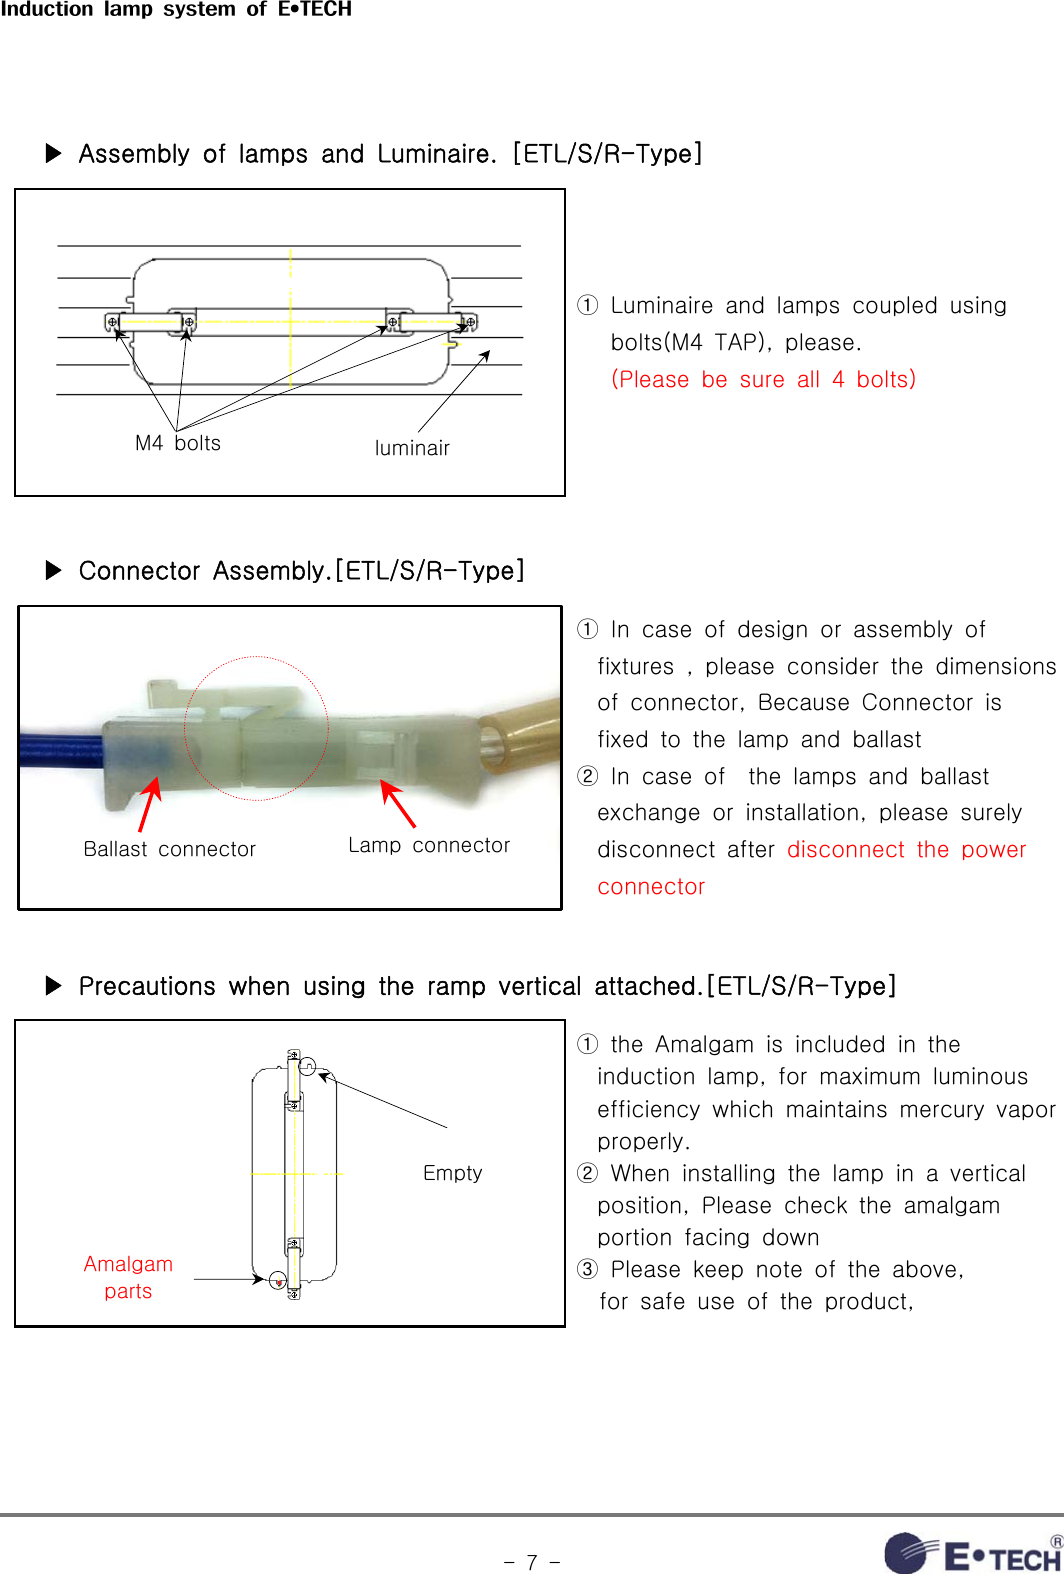 Induction  lamp  system  of  E•TECH-  7  -   ▶ Assembly of lamps and Luminaire. [ETL/S/R-Type] M4  bolts luminair①  Luminaire  and  lamps  coupled  using    bolts(M4 TAP), please.   (Please be sure all 4 bolts)   ▶ Connector Assembly.[ETL/S/R-Type]Ballast  connector Lamp  connector①  In  case  of  design  or  assembly  of fixtures  ,  please  consider  the  dimensions of  connector,  Because  Connector  is fixed  to  the  lamp  and  ballast② In case of  the lamps and ballast exchange  or  installation,  please  surely disconnect  after  disconnect the power connector    ▶ Precautions when using the ramp vertical attached.[ETL/S/R-Type]EmptyAmalgam parts①  the  Amalgam  is  included  in  the induction  lamp,  for  maximum  luminous efficiency  which  maintains  mercury  vapor properly.②  When  installing  the  lamp  in  a  vertical position,  Please  check  the  amalgam portion  facing  down③  Please  keep  note  of  the  above,     for  safe  use  of  the  product, 